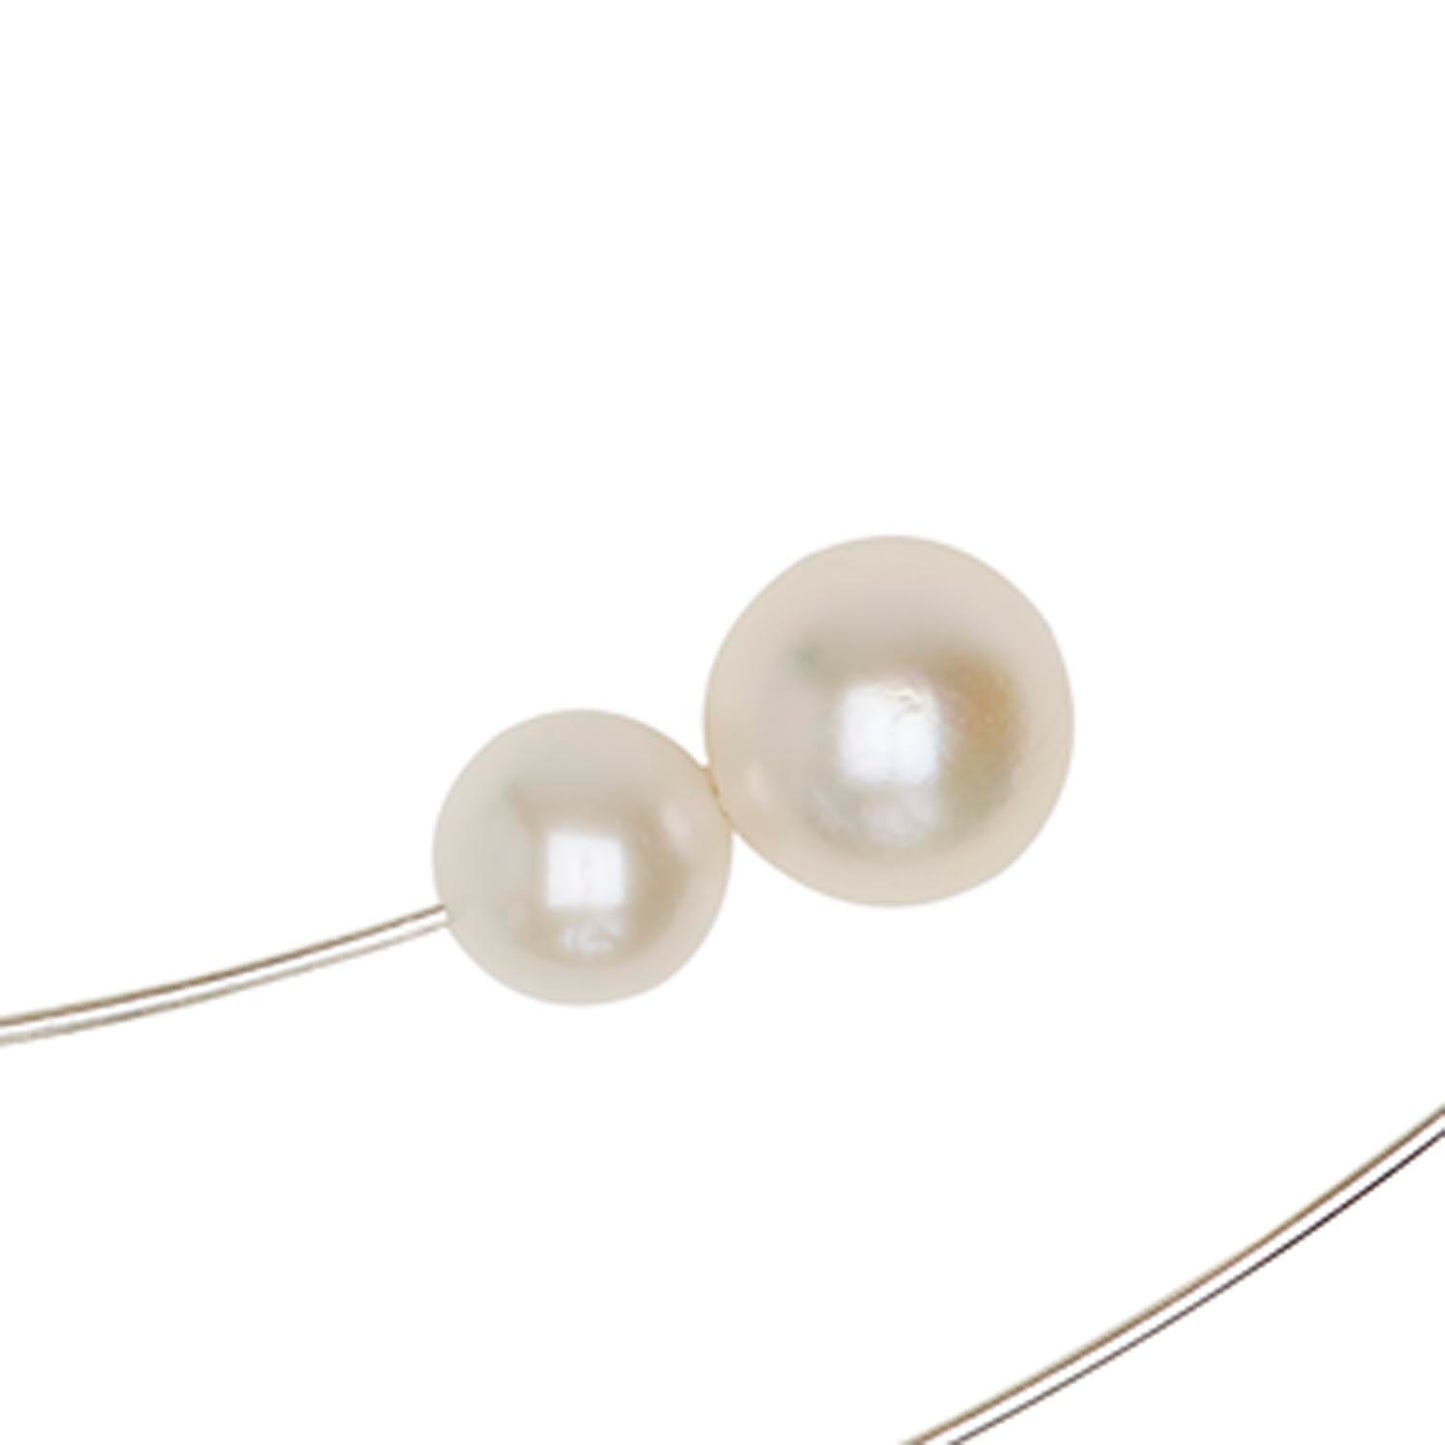 Square Asymmetric Neckwire with Round Freshwater Pearls